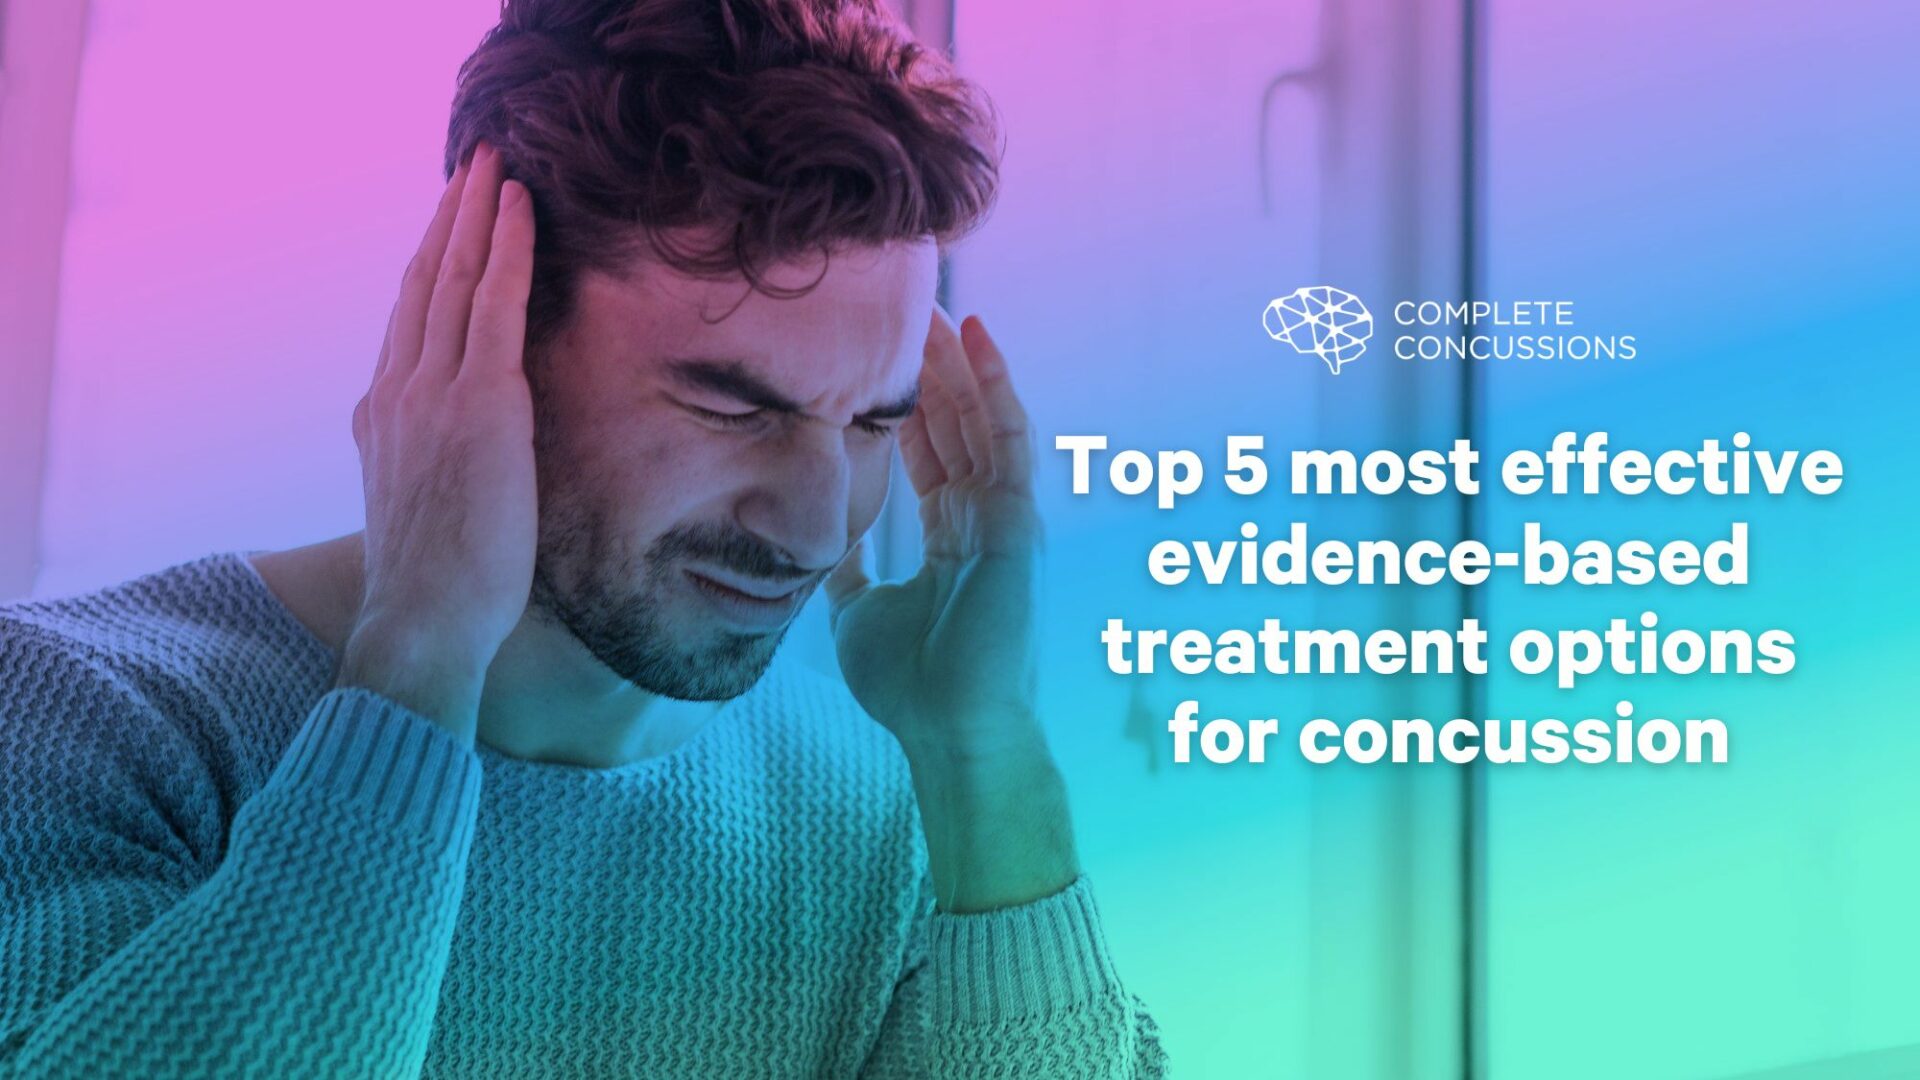 Top 5 Most Effective Evidence-Based Treatment Options for Concussion